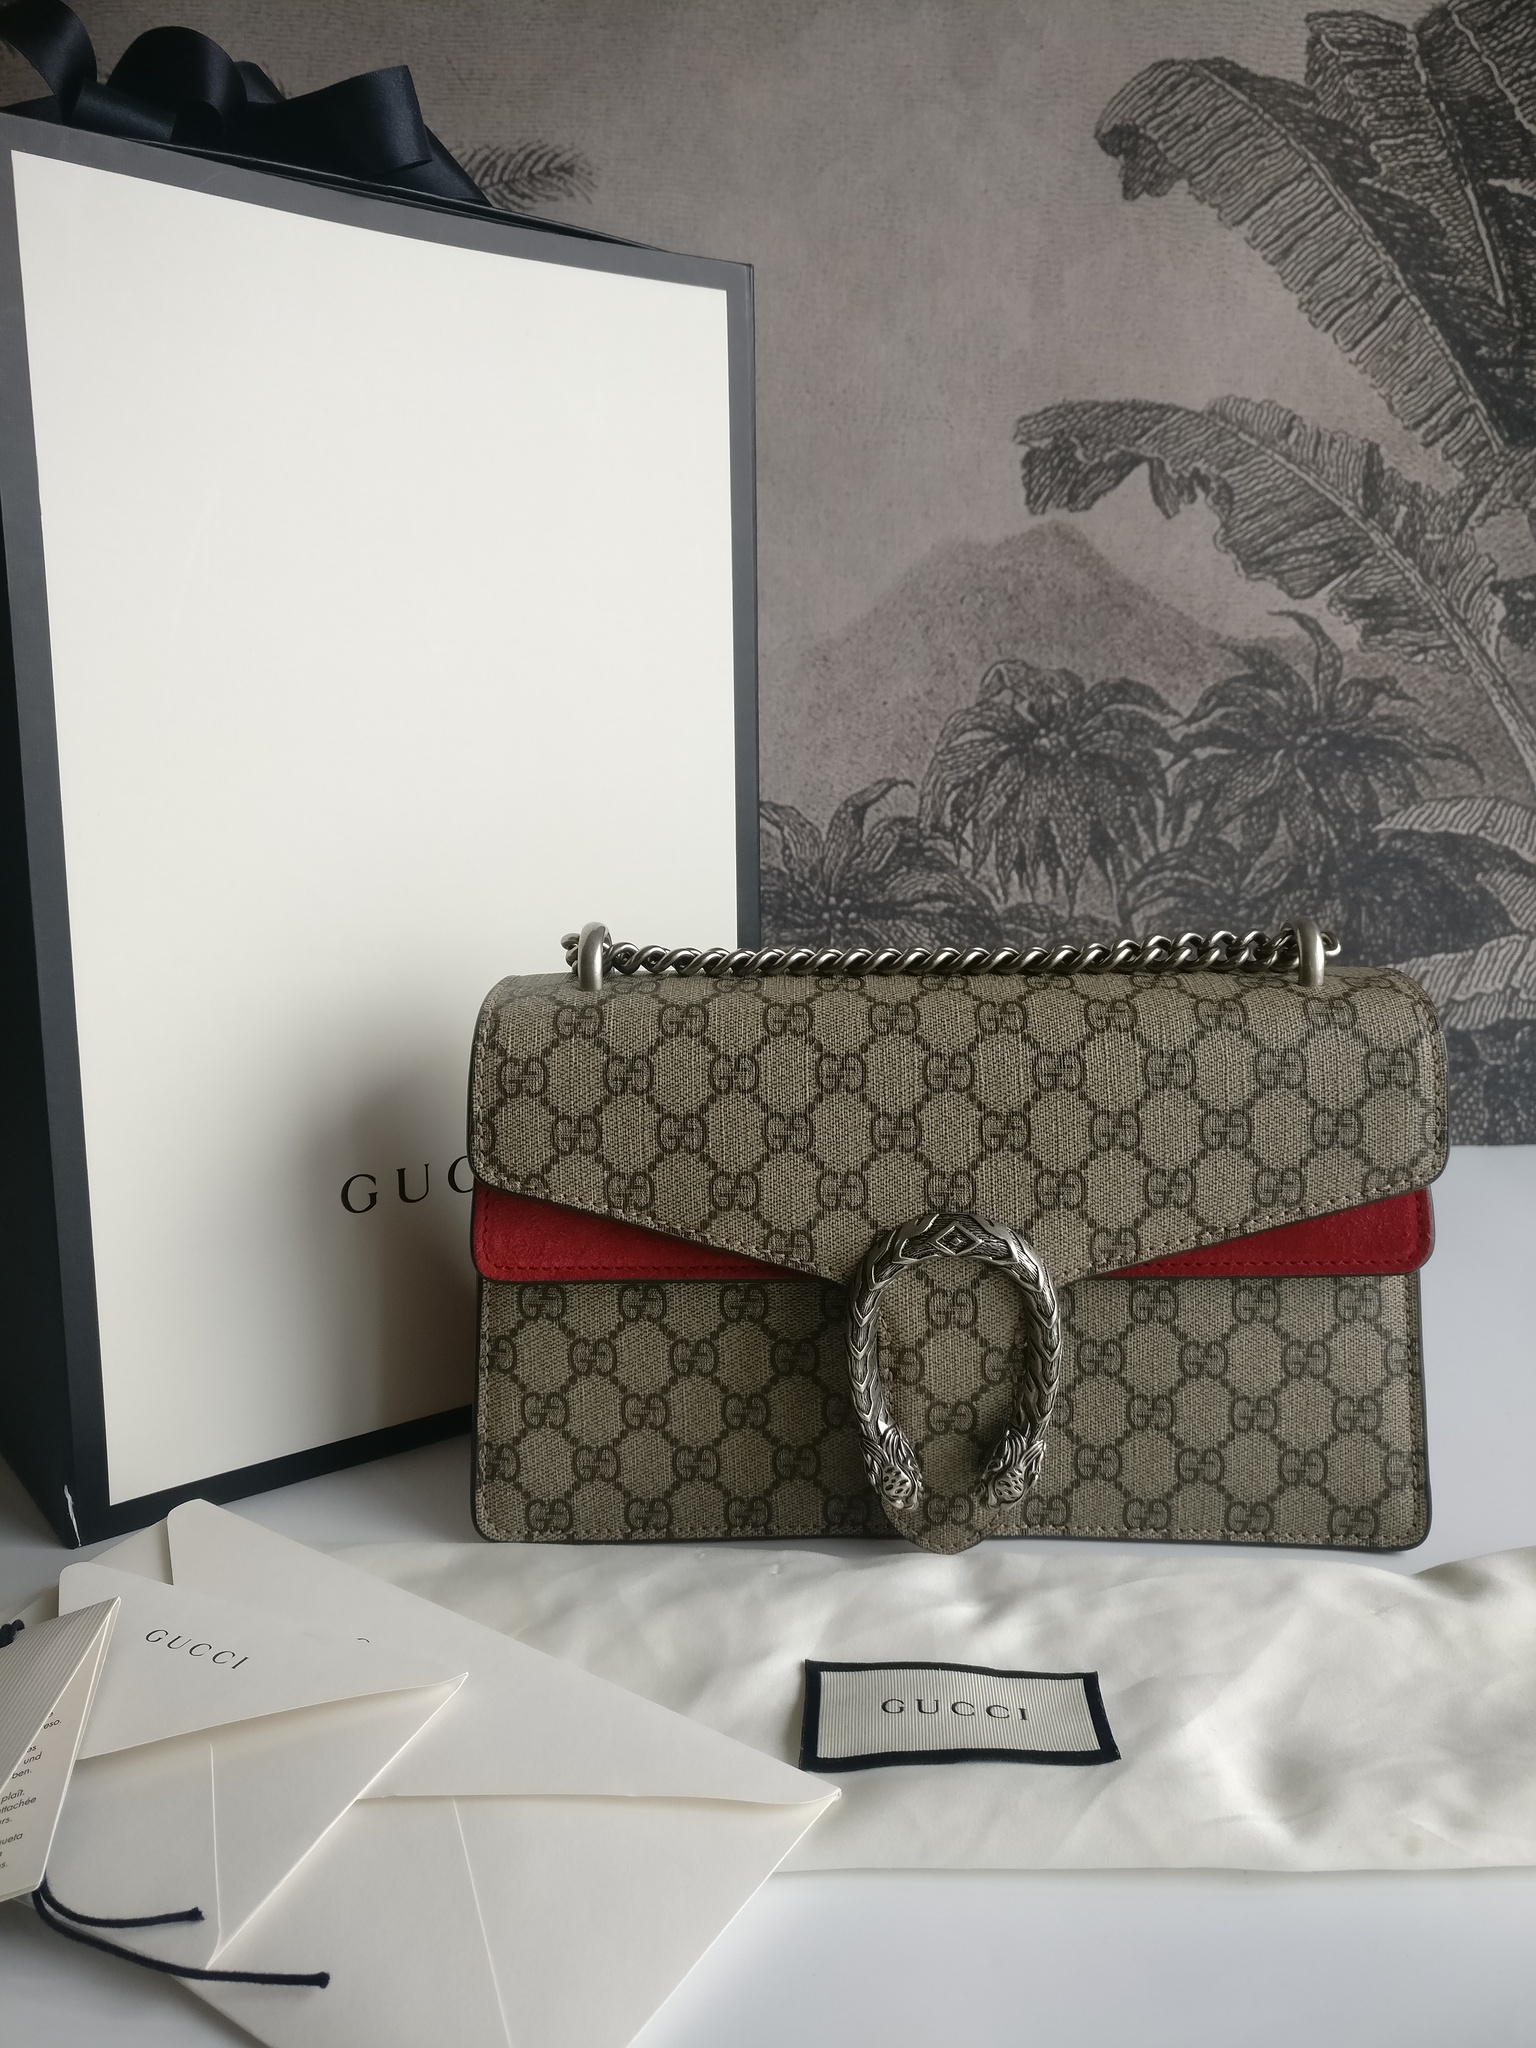 Gucci Dionysus Small Red